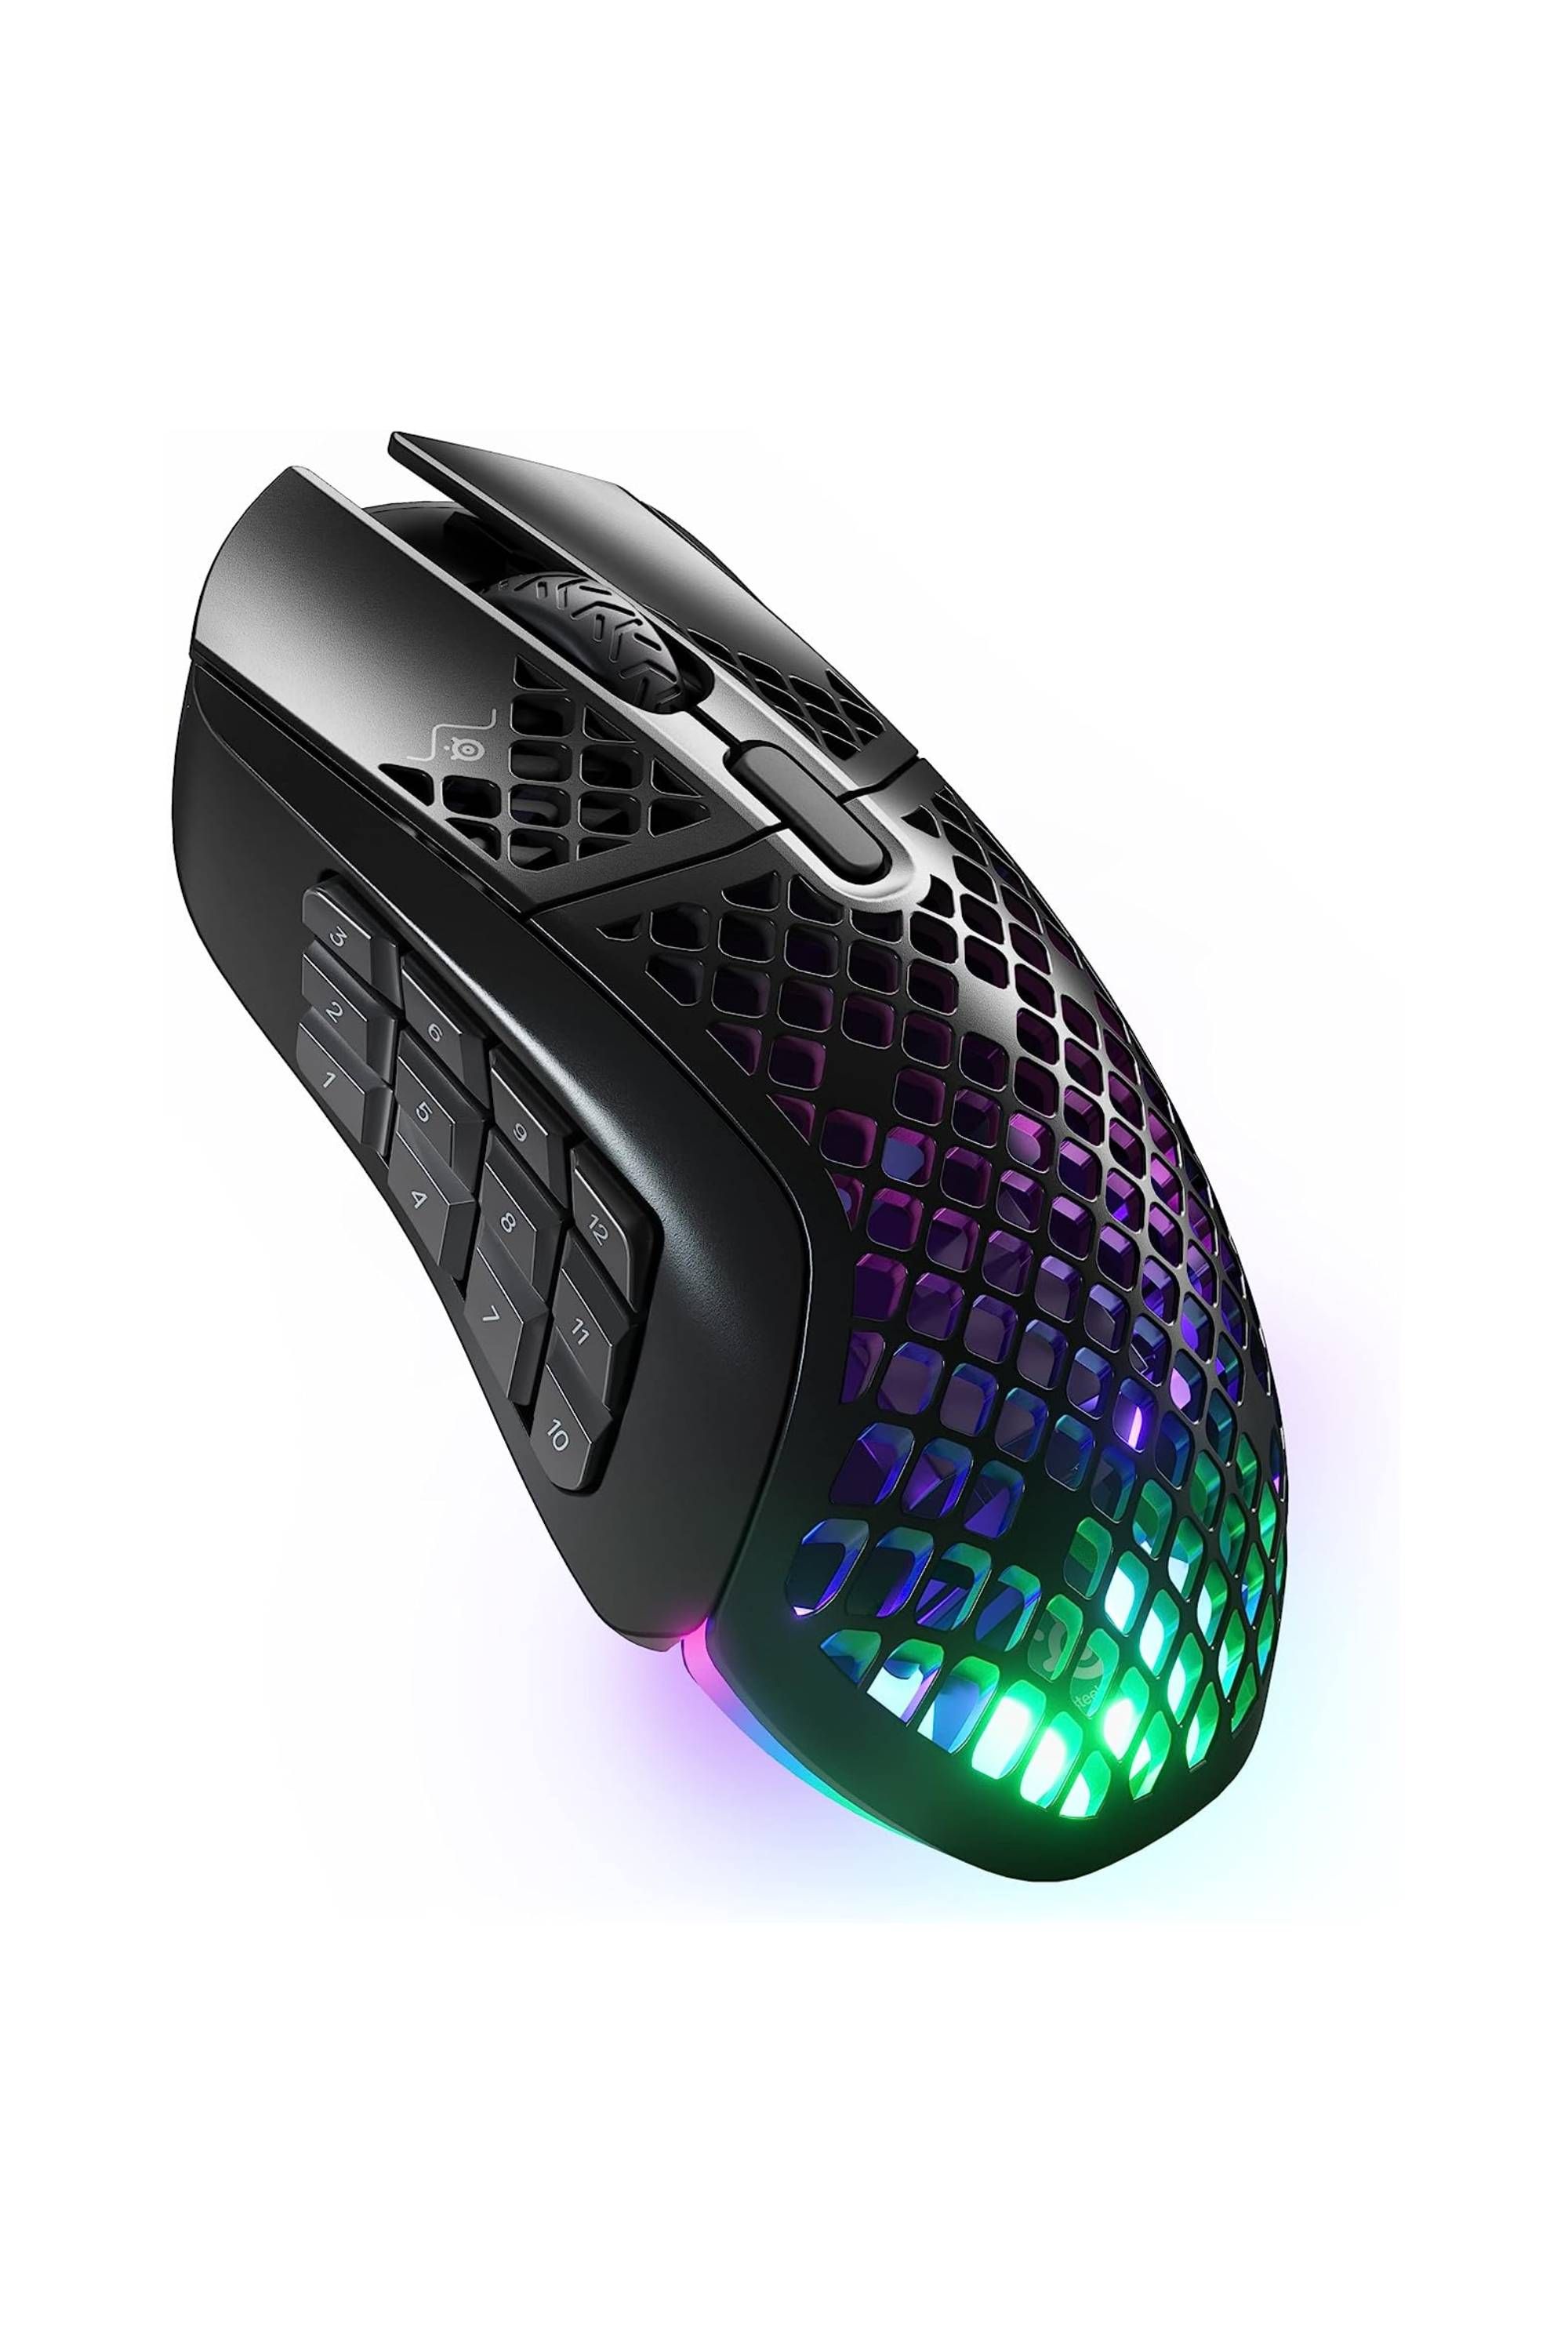 Wired vs. Wireless Mouse: Which Is Better for Gaming? – Voltcave